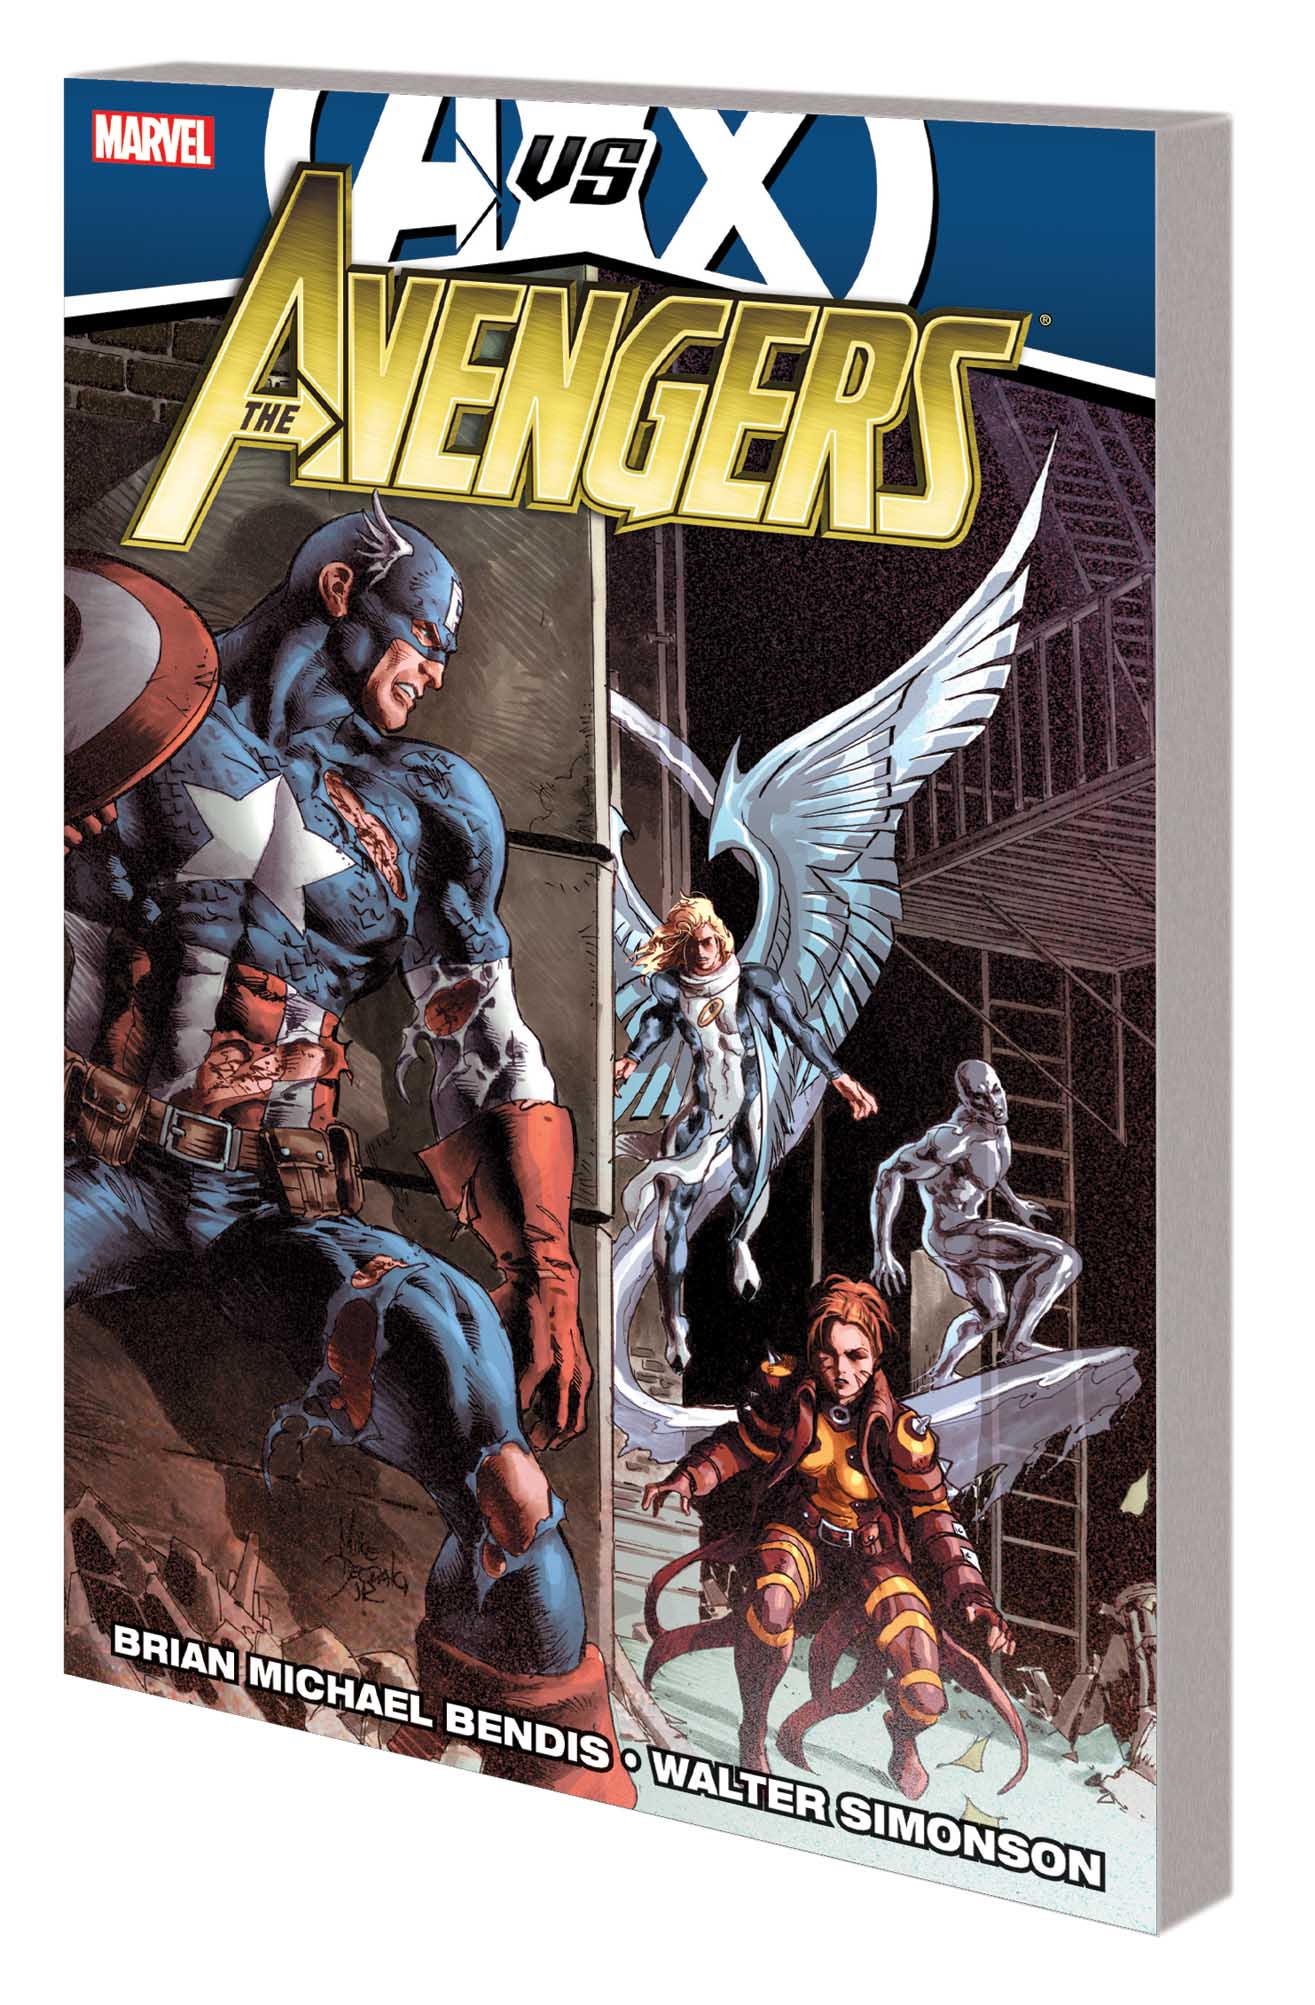 Avengers: (Issues 25-30) (Trade Paperback)